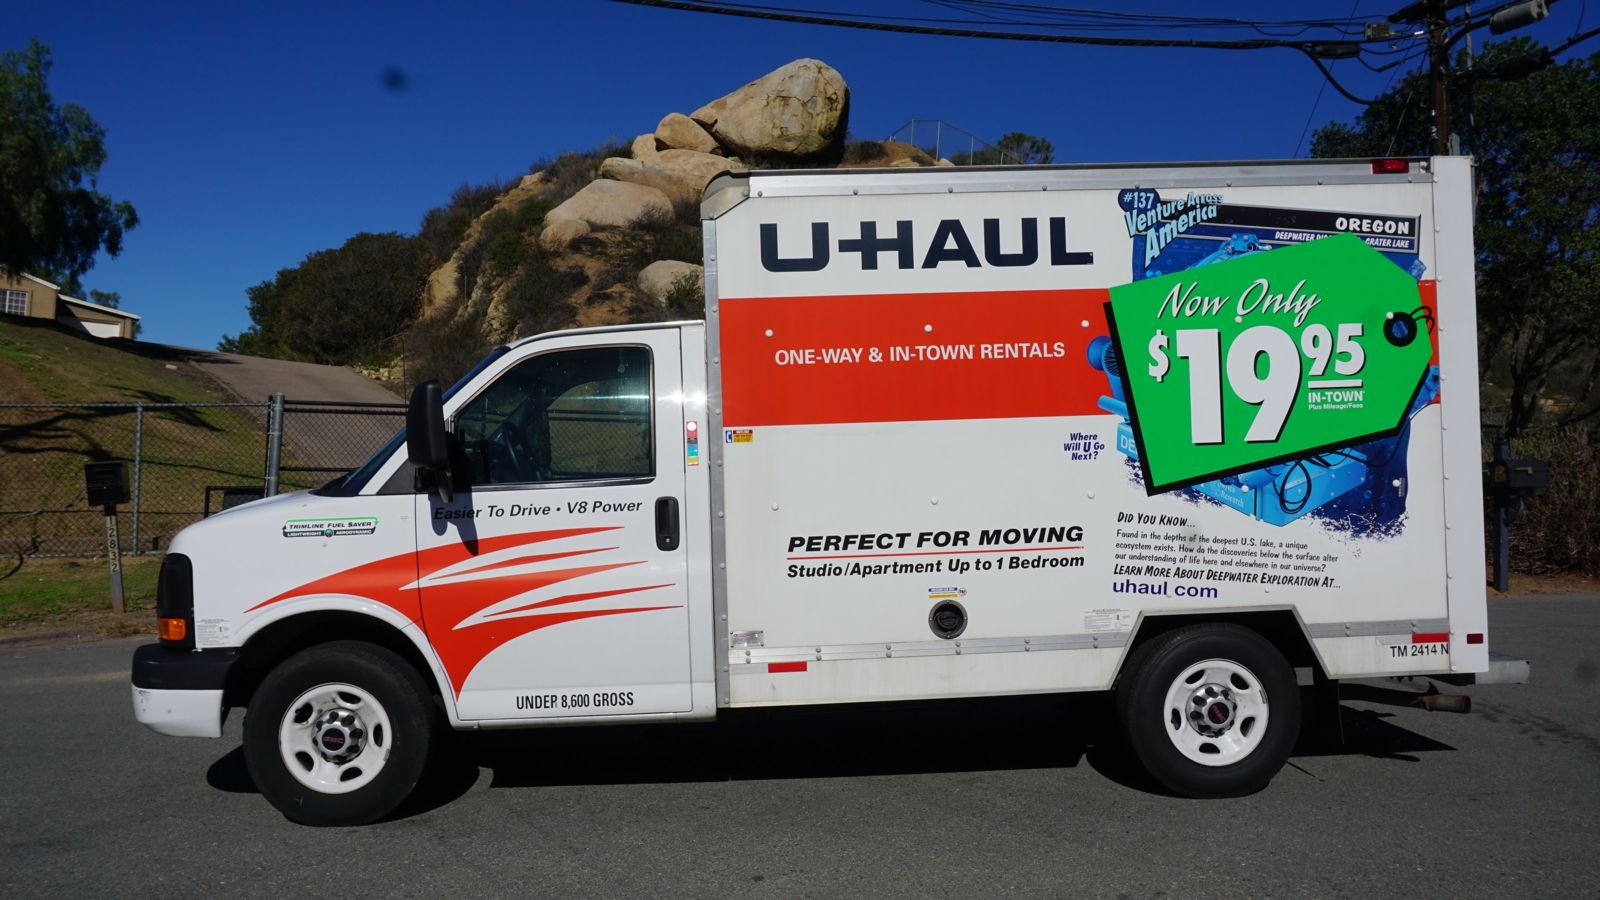 Hurt by a U-Haul truck in Virginia, personal injury lawyers